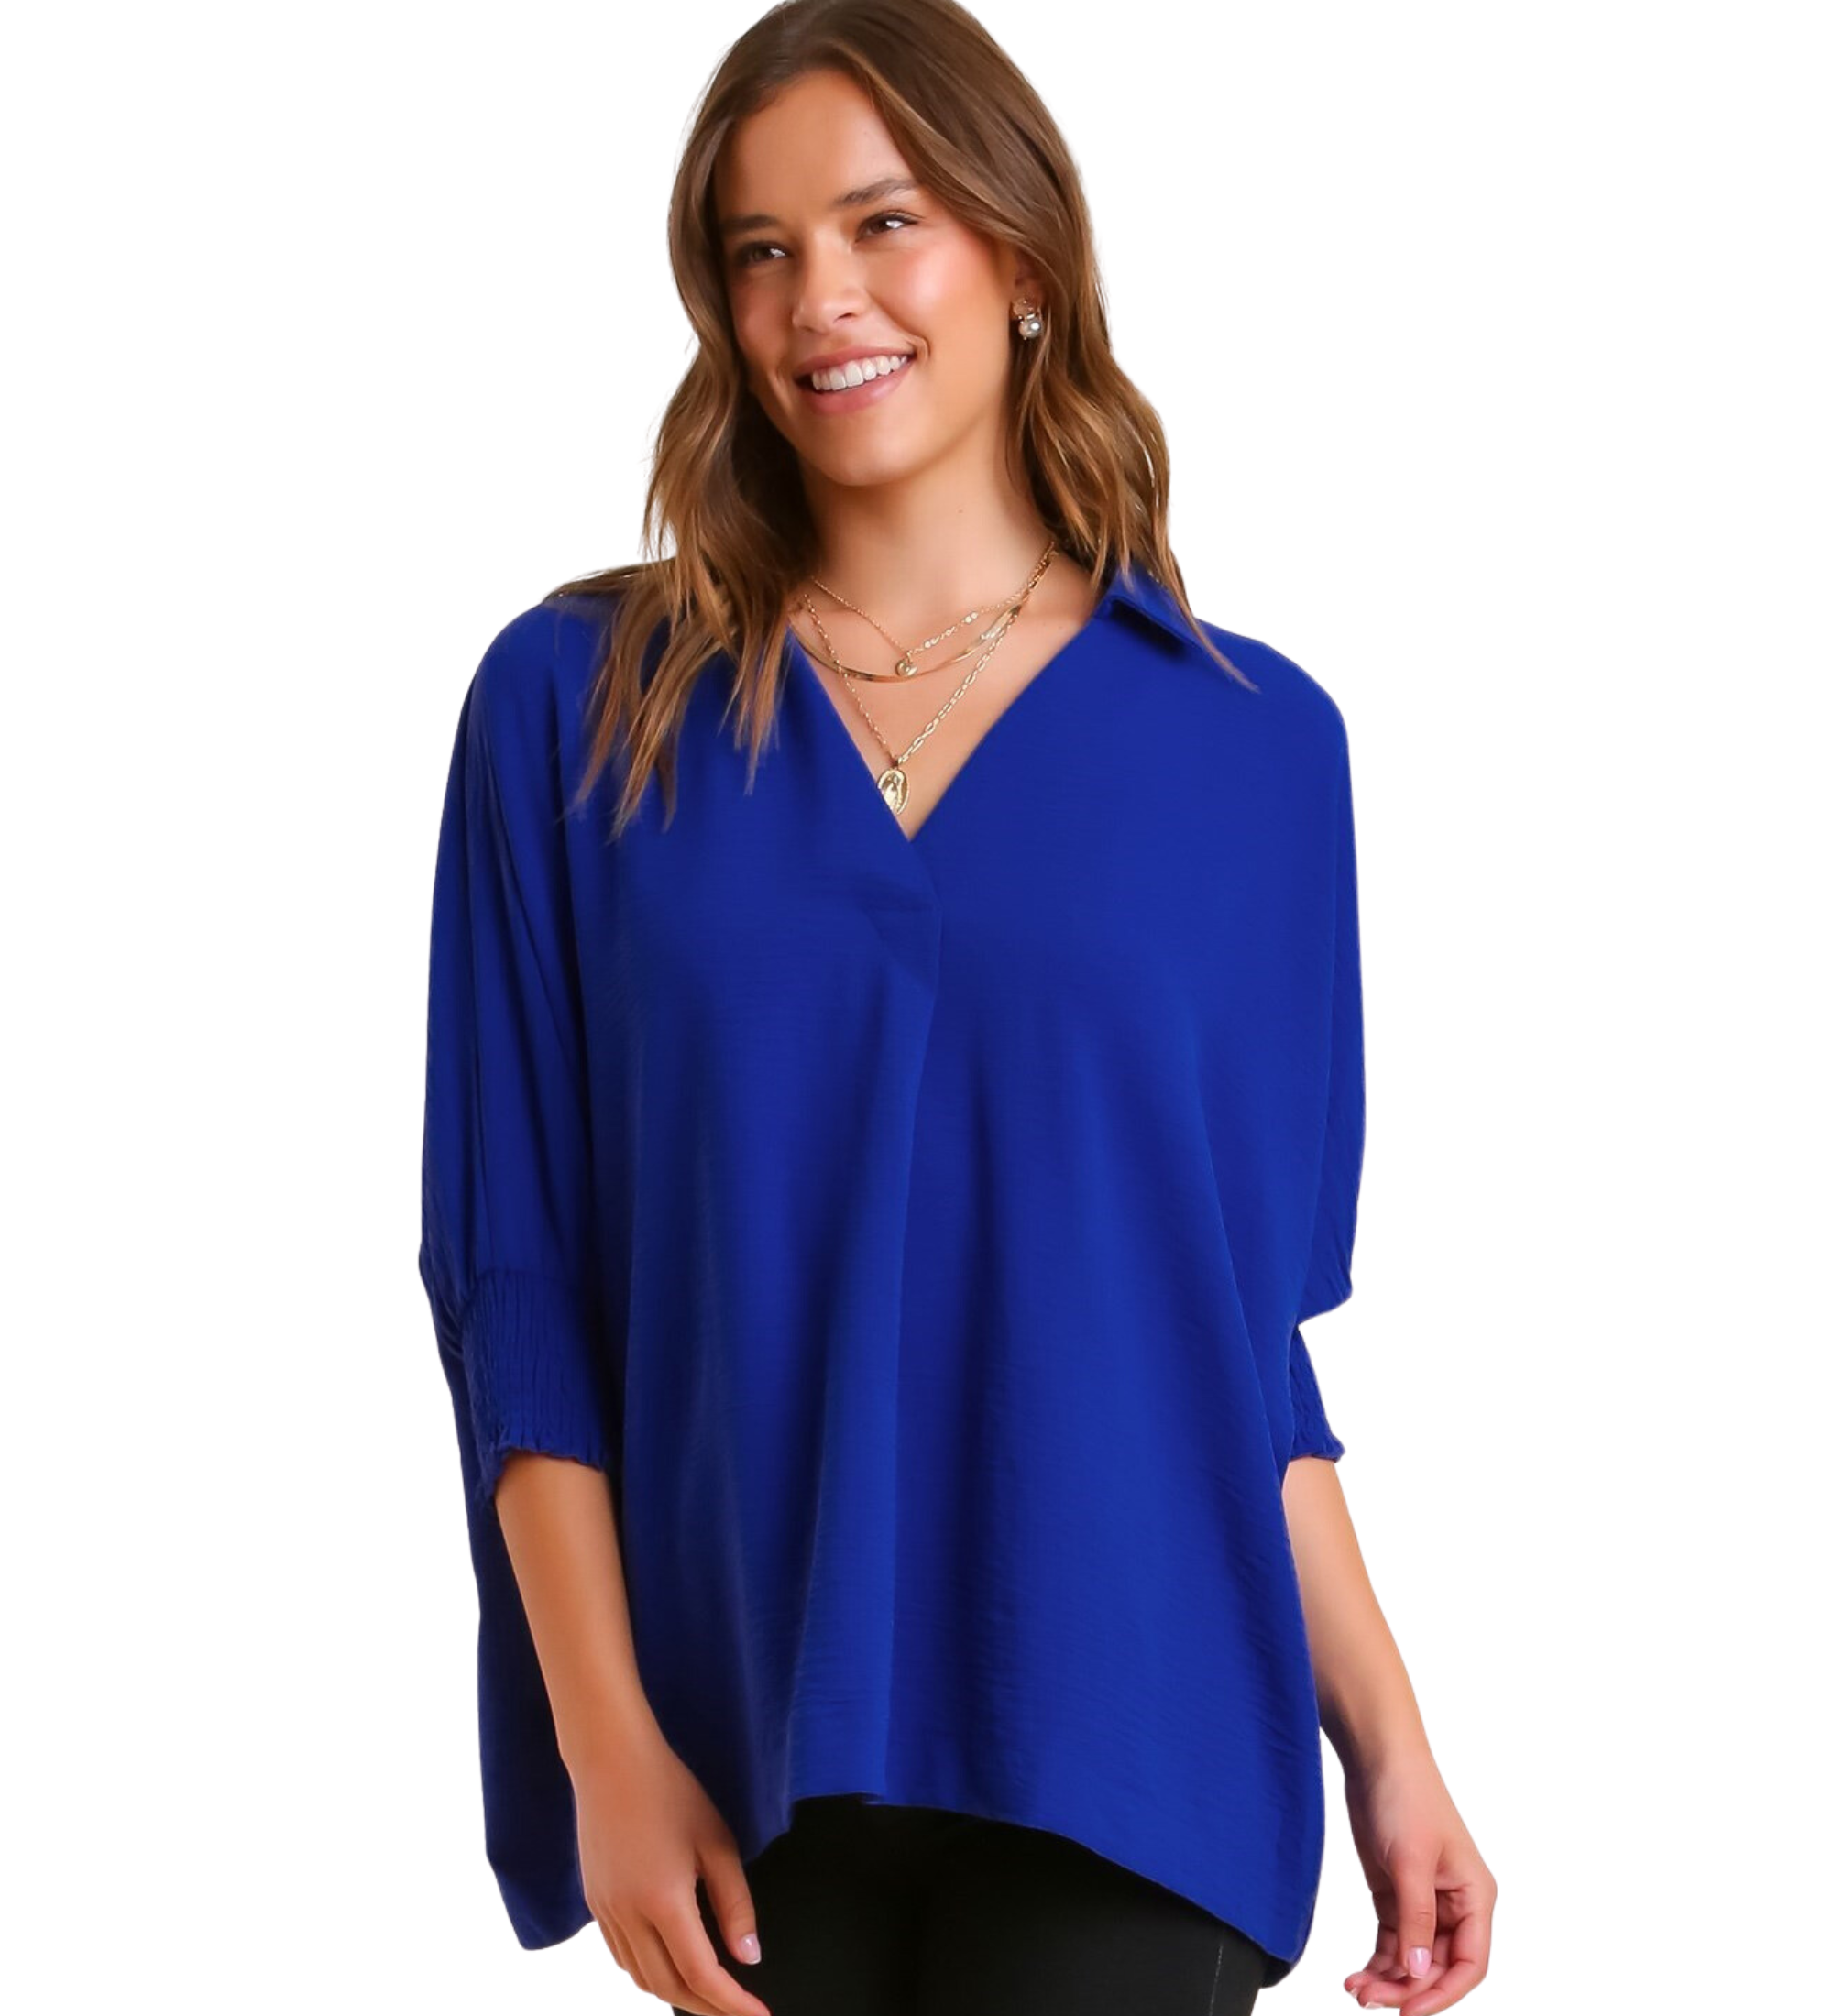 Sapphire Collared Top